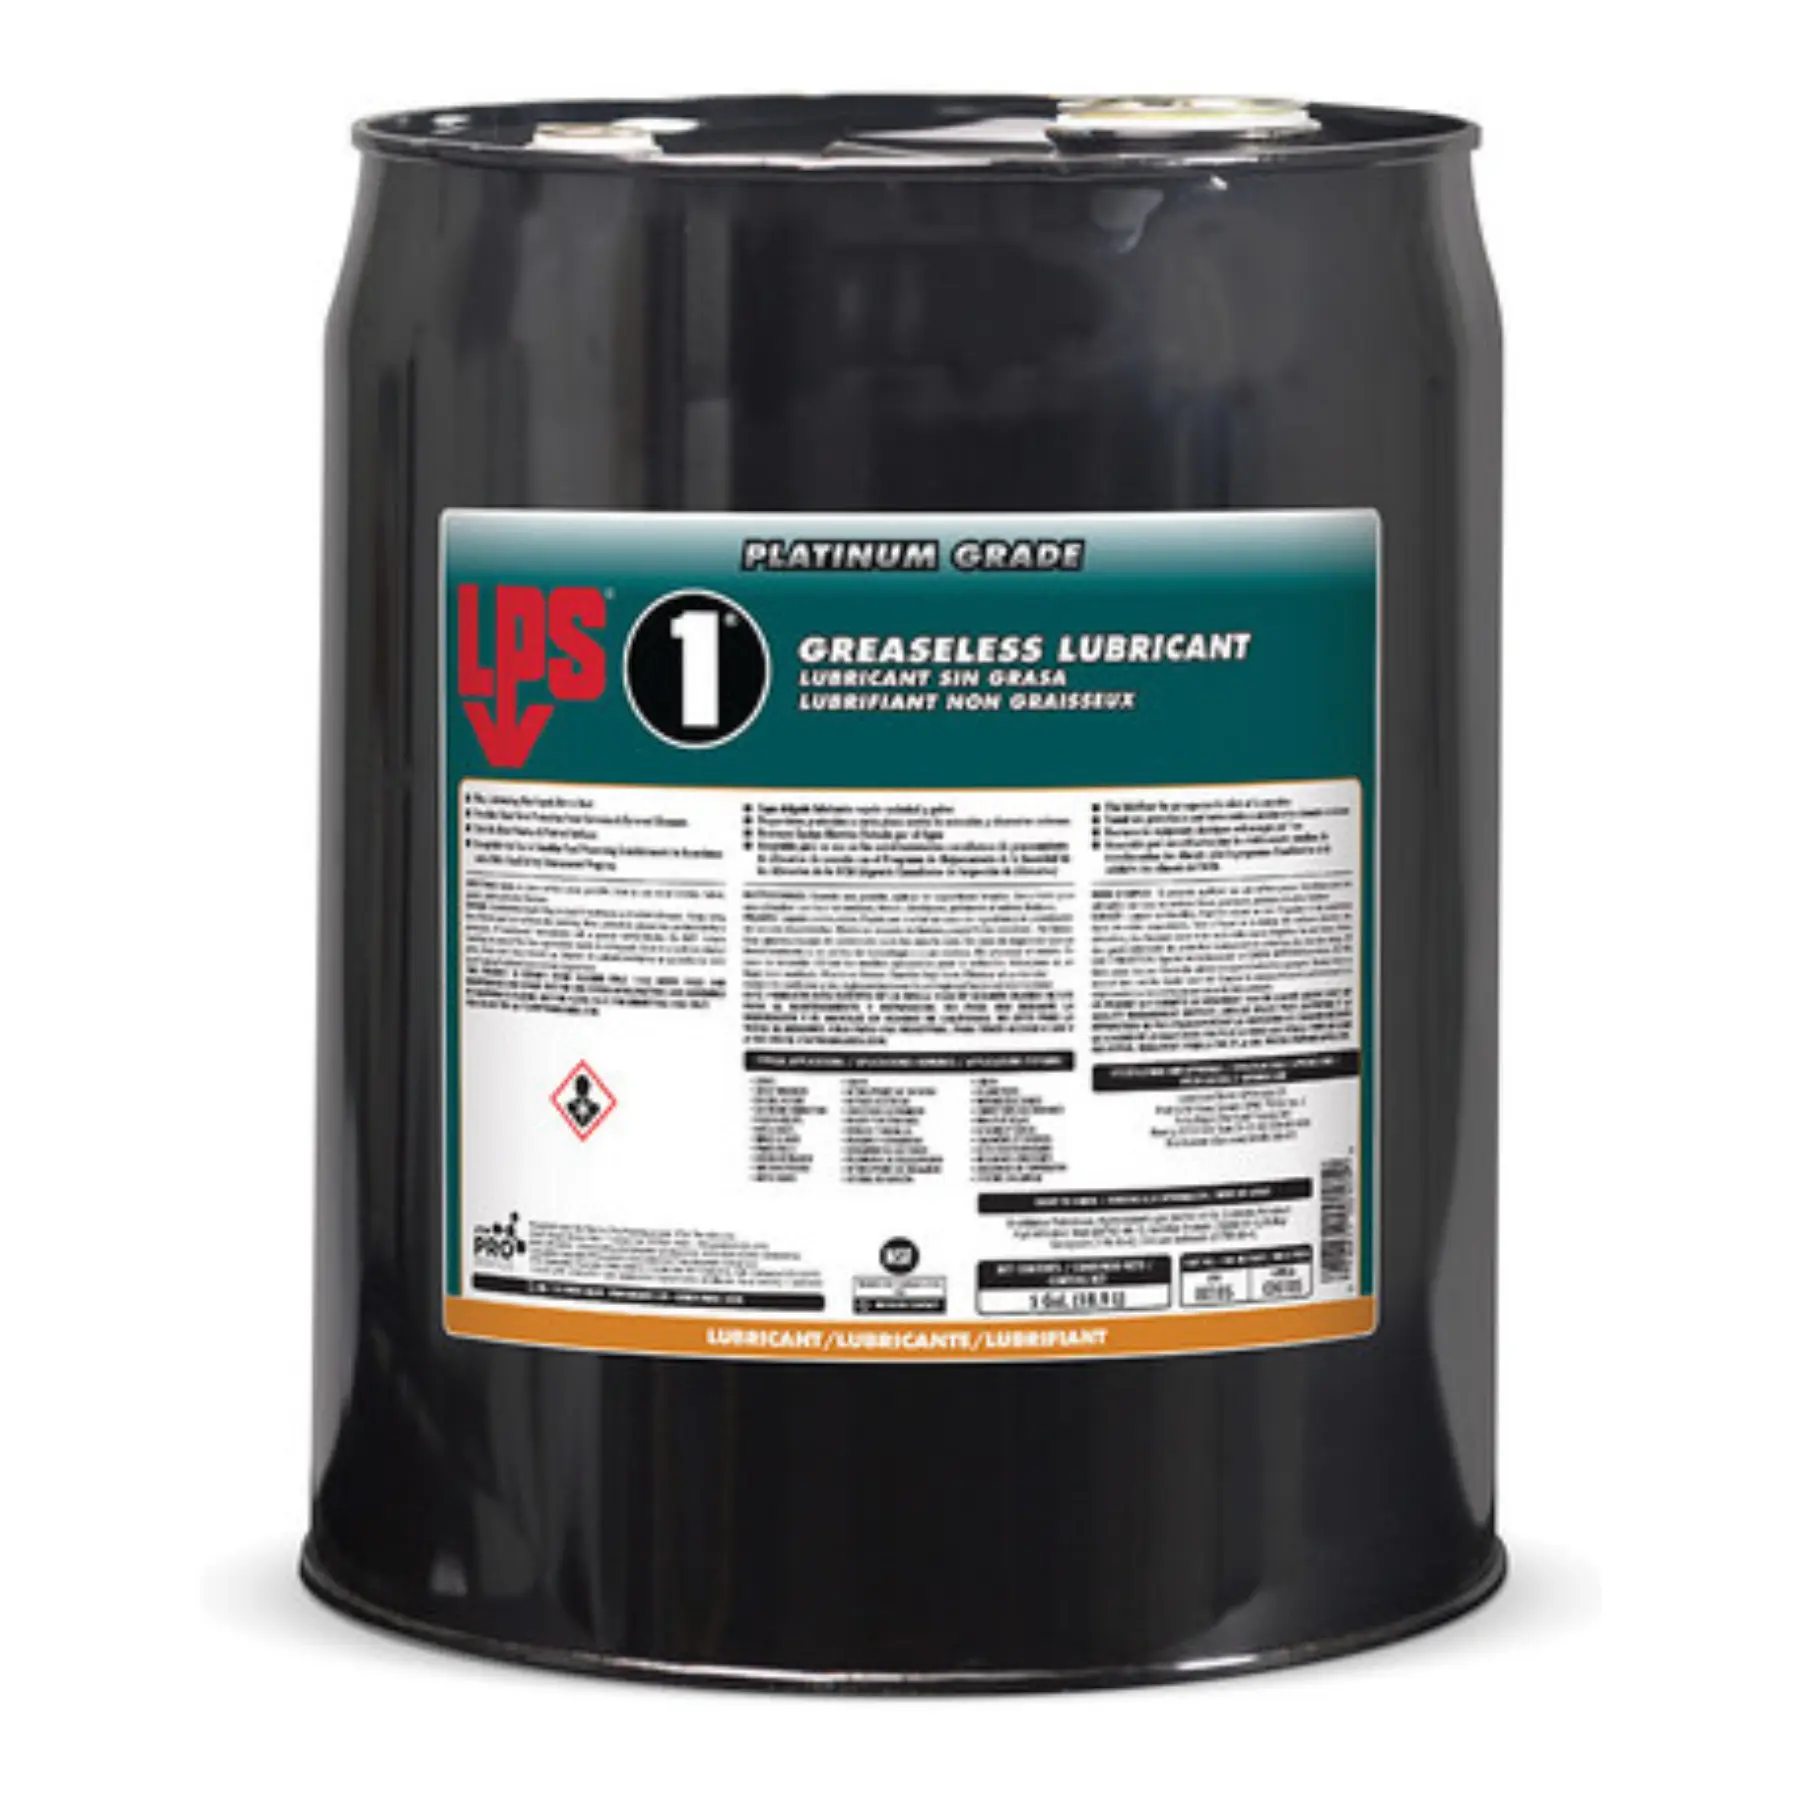 LPS 1 GREASELESS LUBRICANT 00105